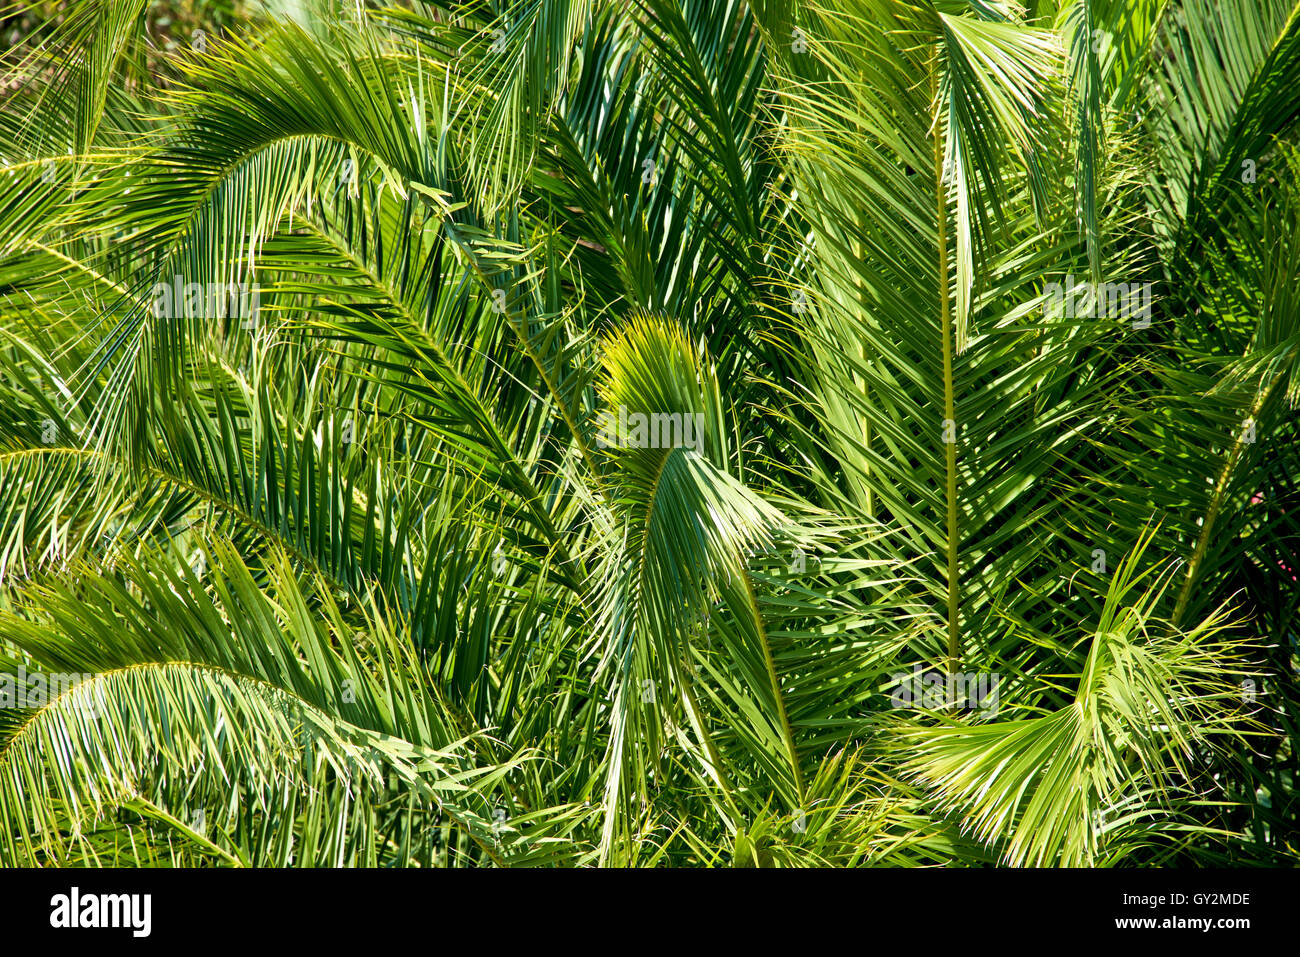 Lush green palm leaves in tropical forest as background Stock Photo